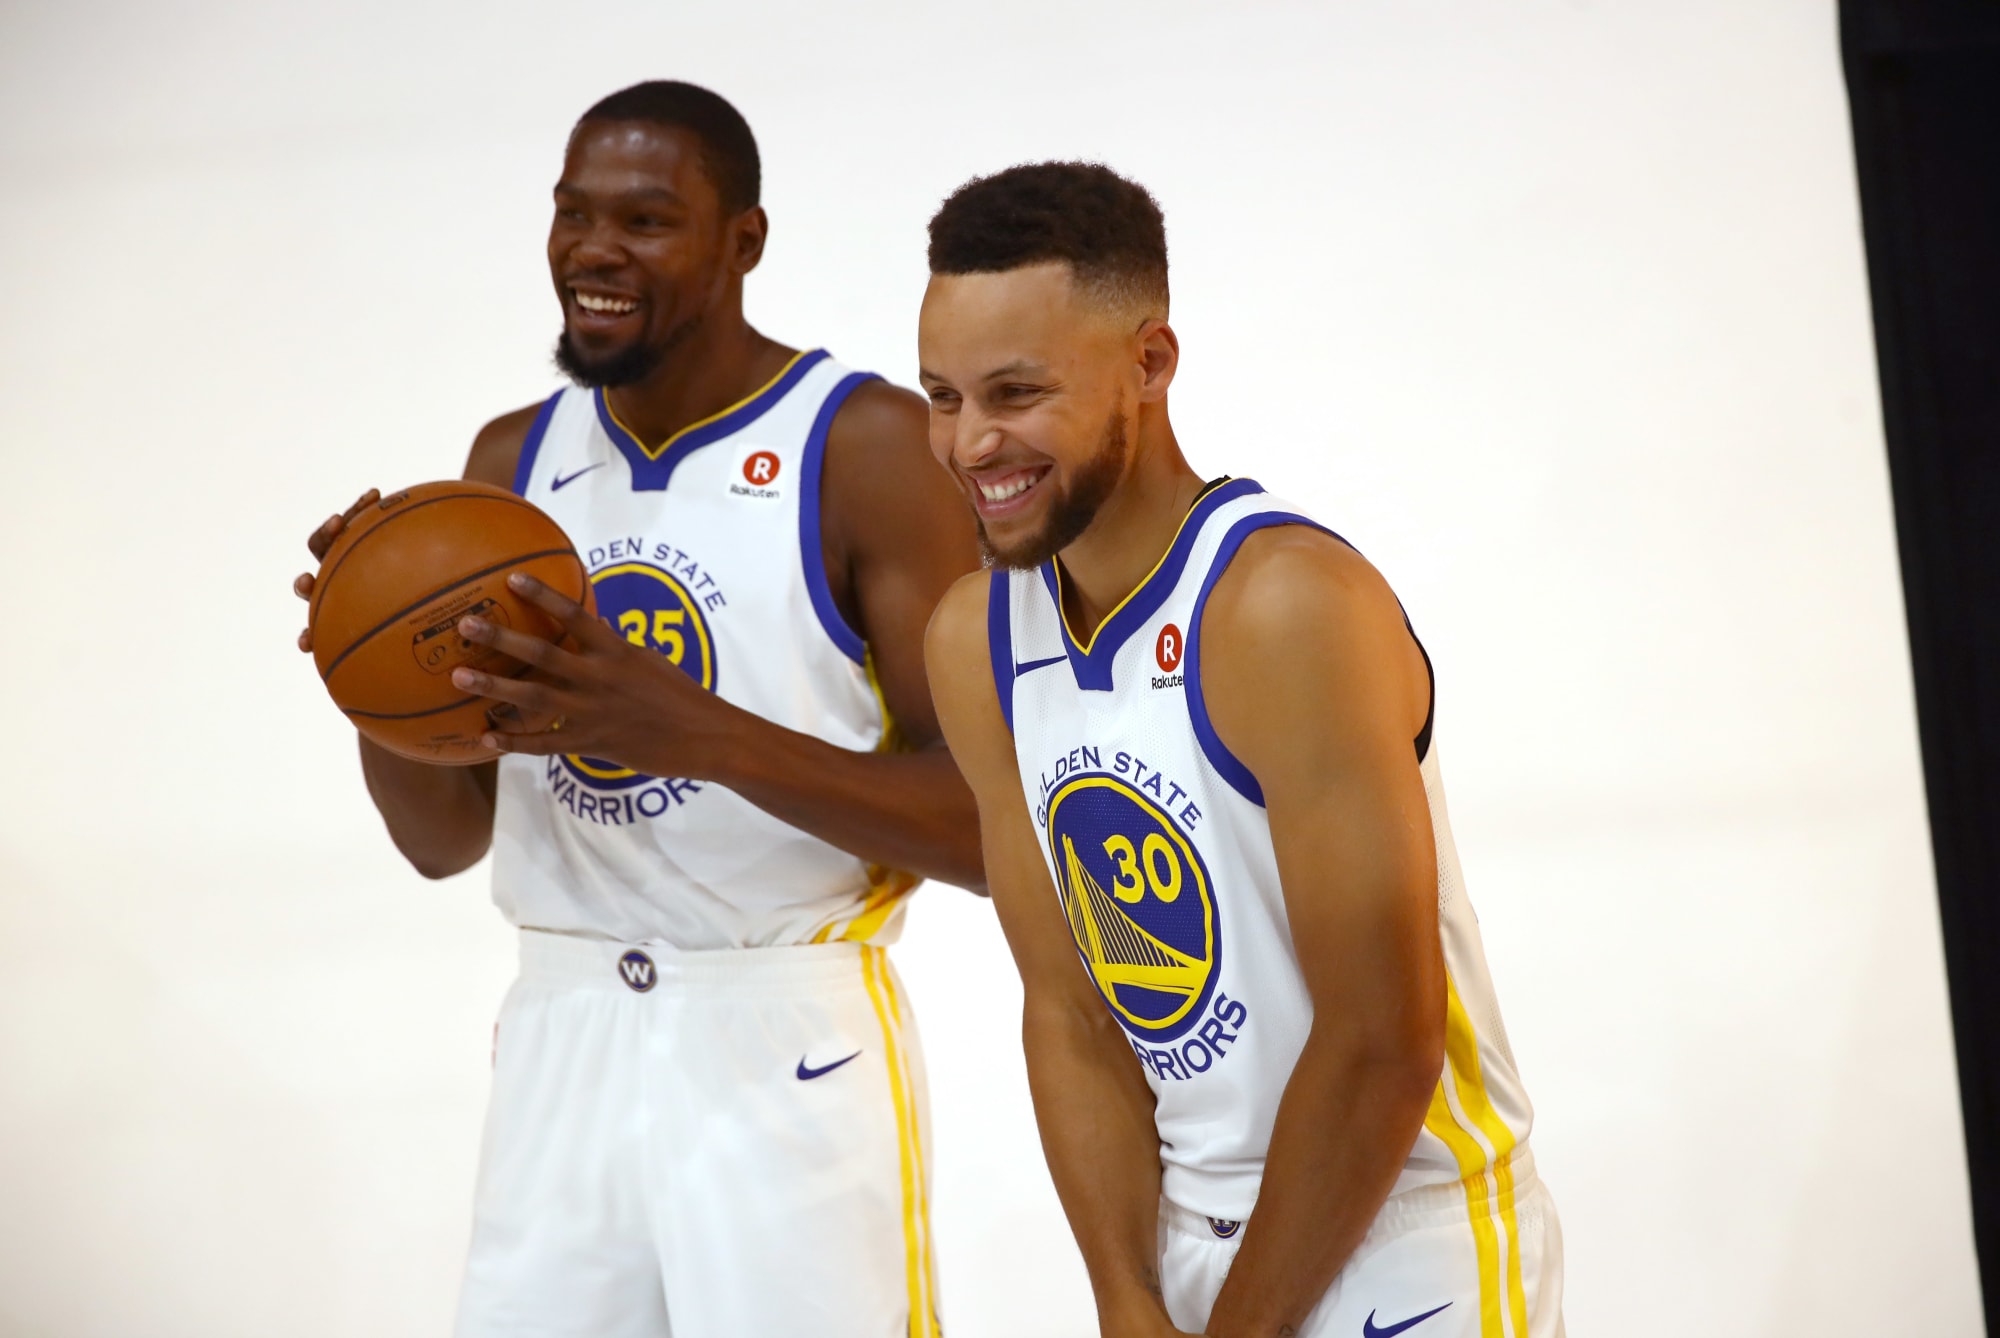 Training camp an important time for Warriors